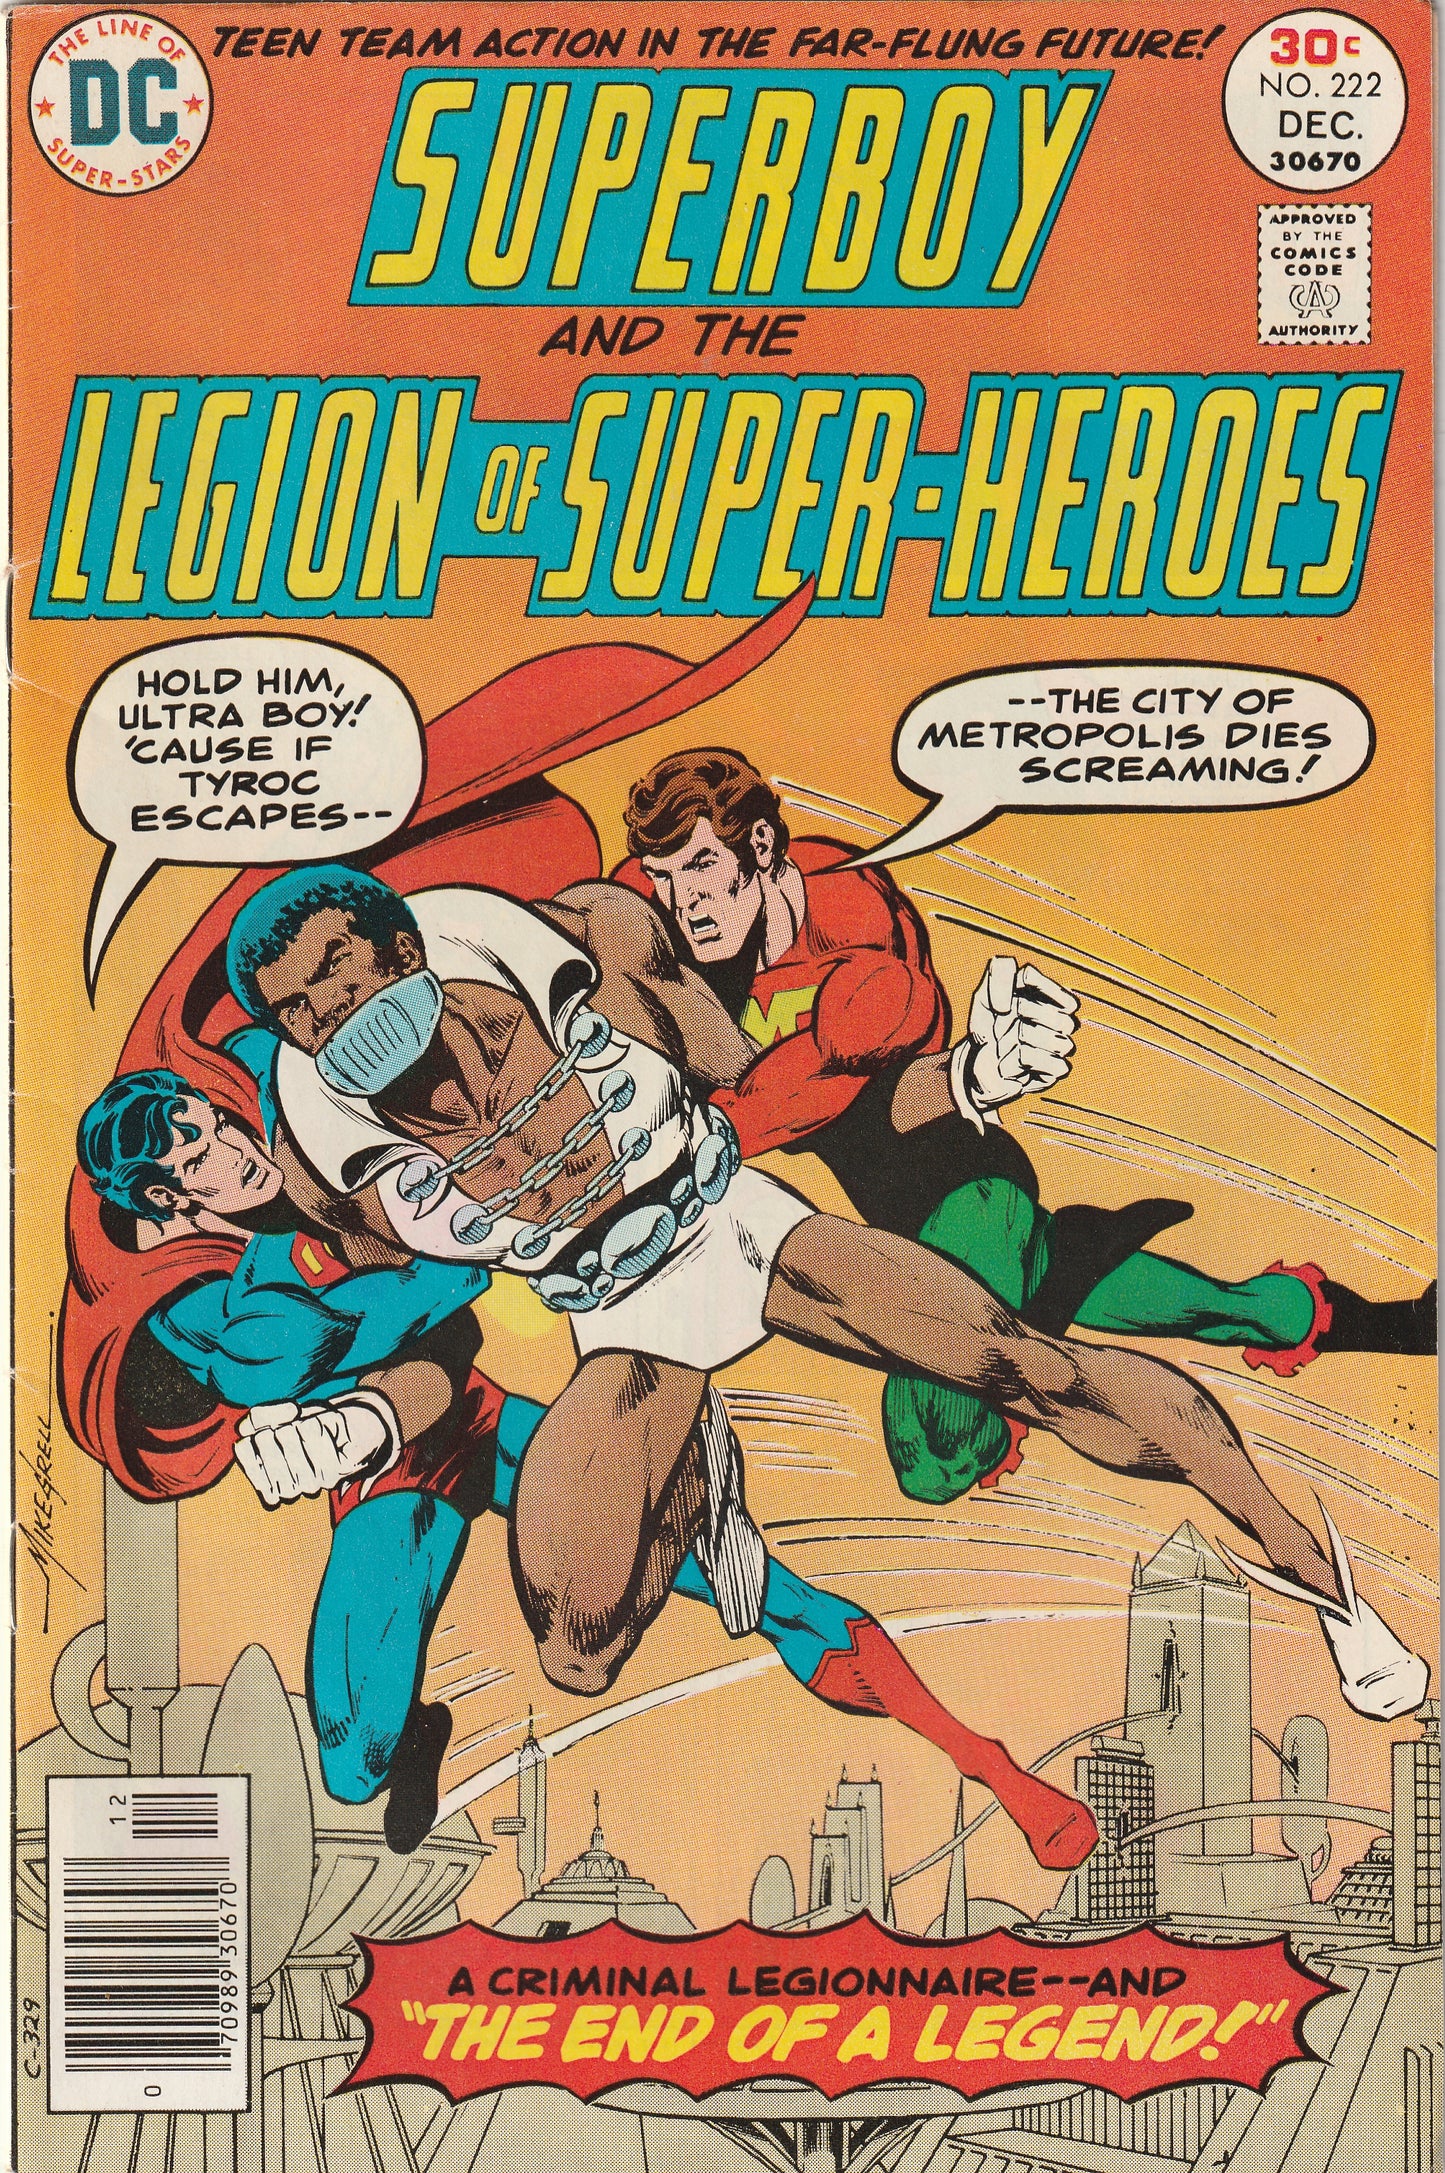 Superboy #222 (1976) - Starring the Legion of Super-Heroes